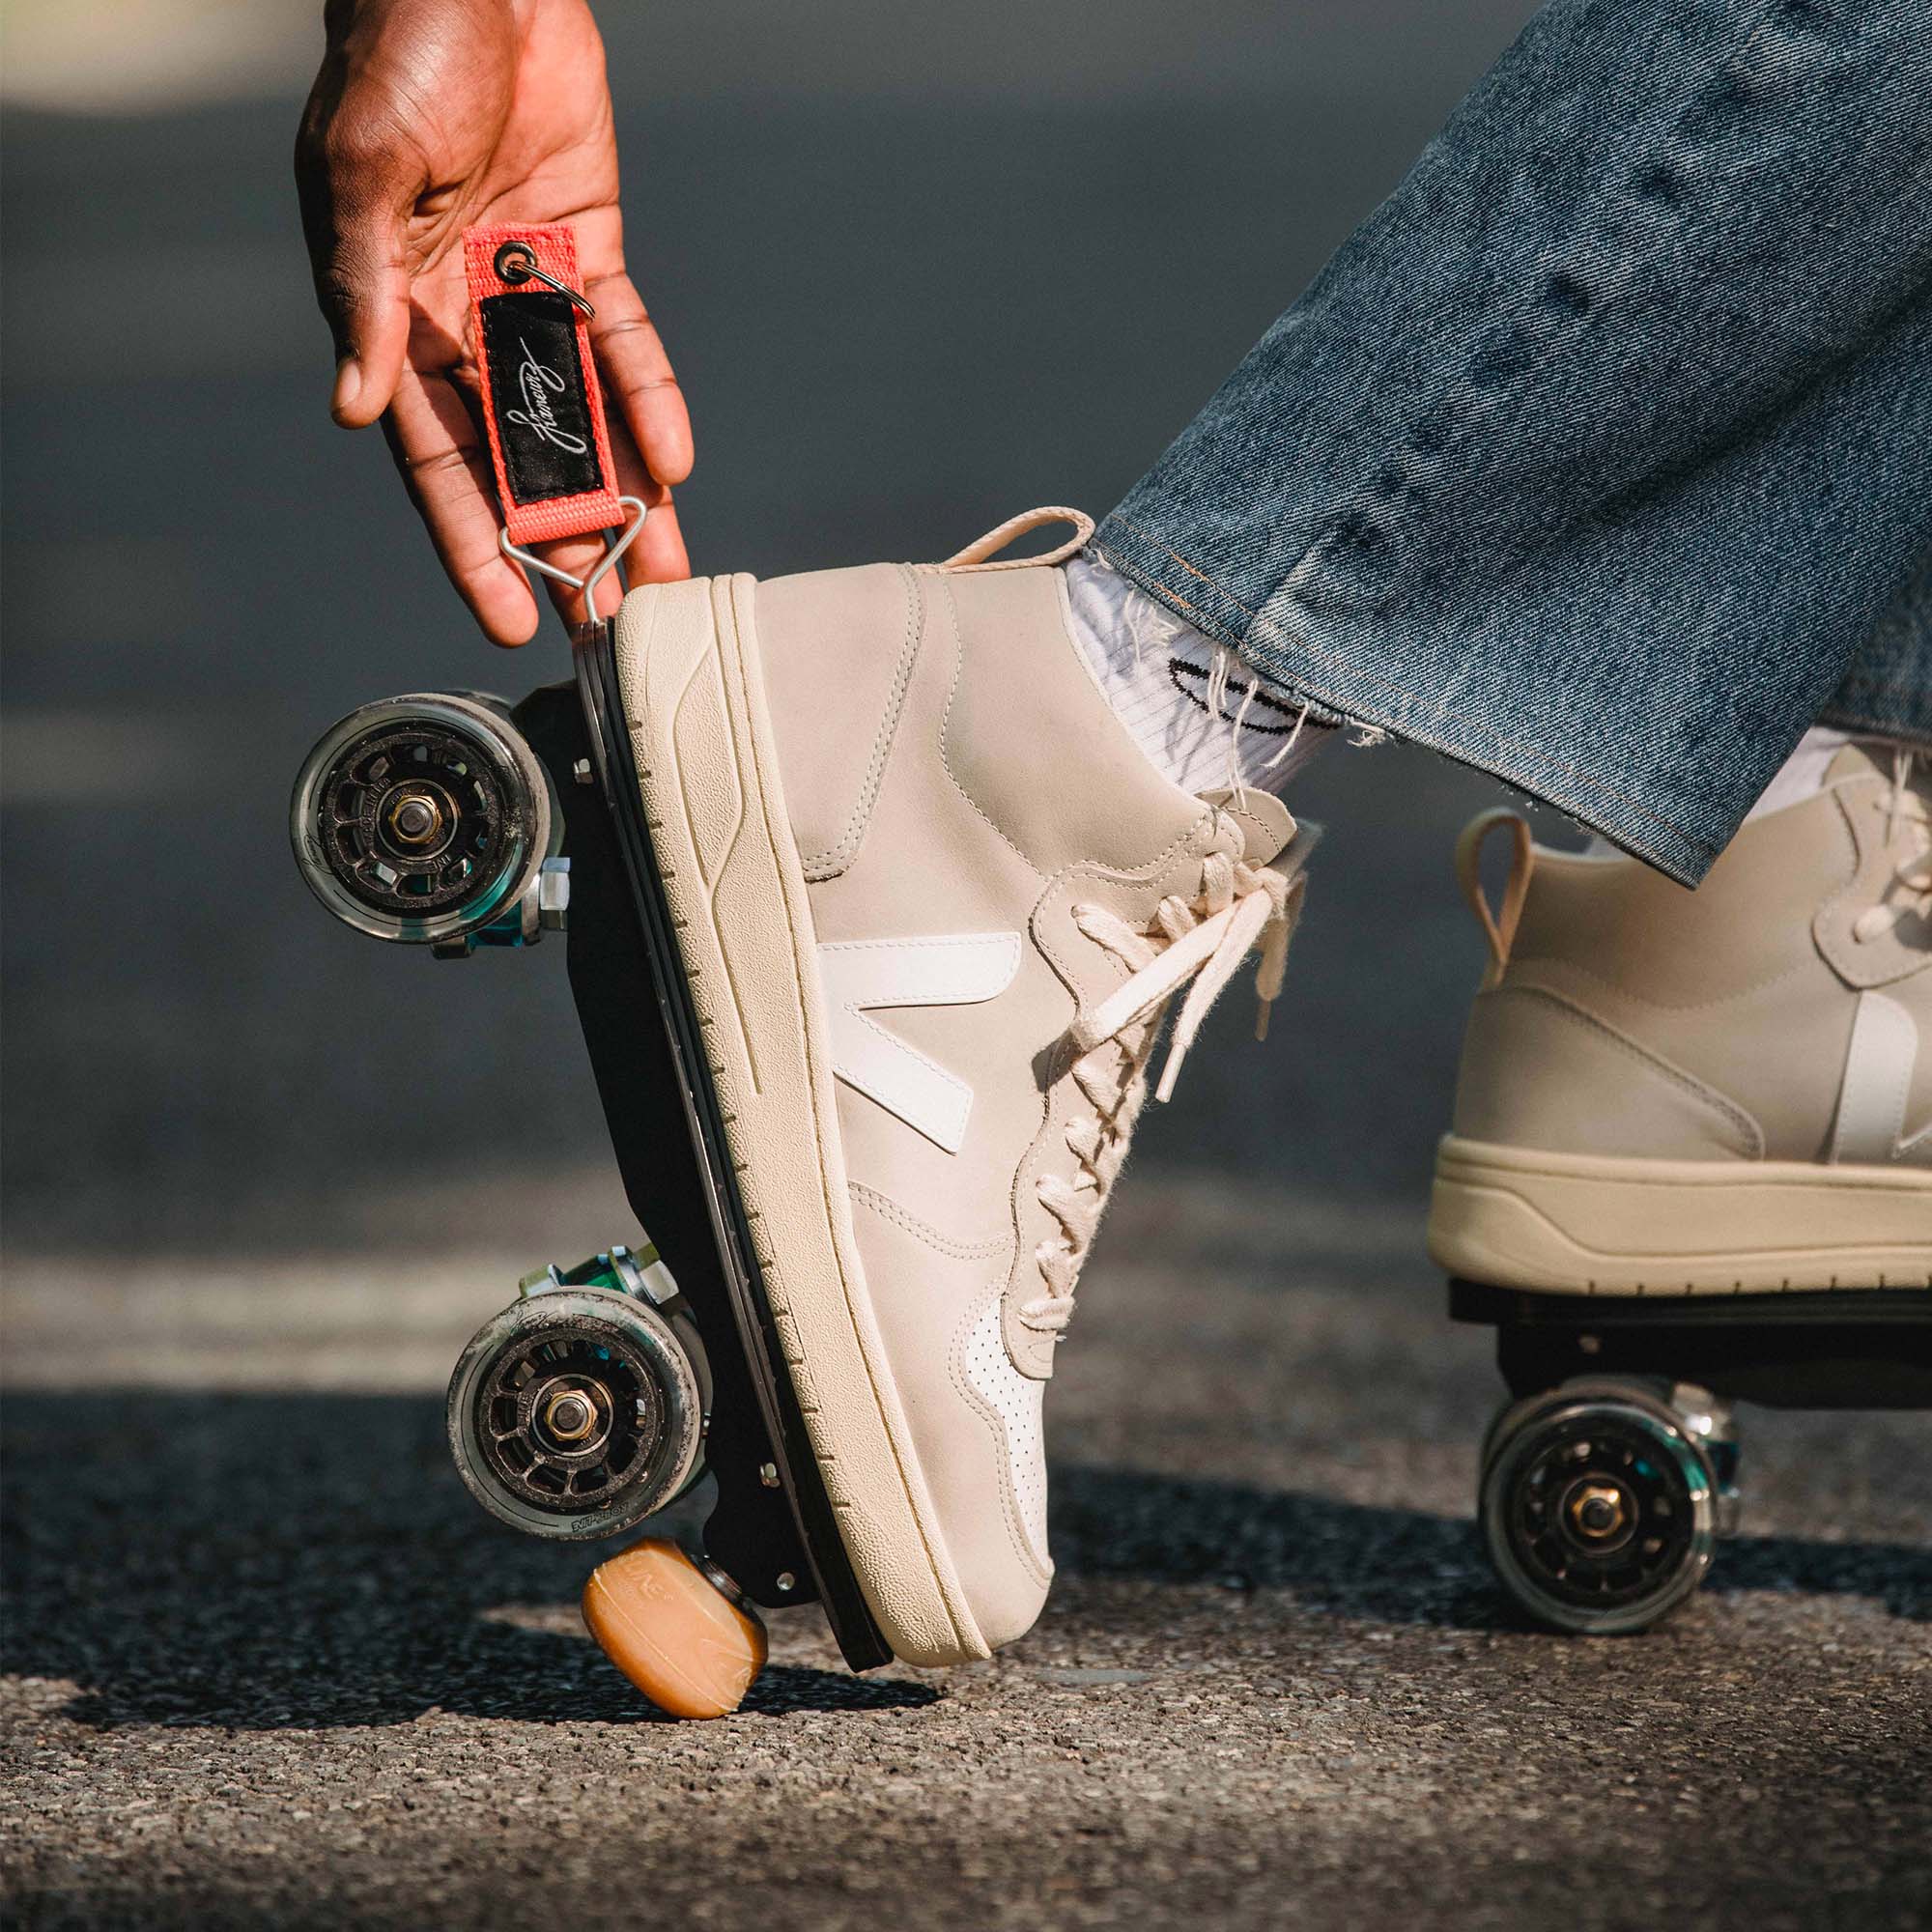 The Veja V-15 Natural White detachable roller skates are being clipped-off